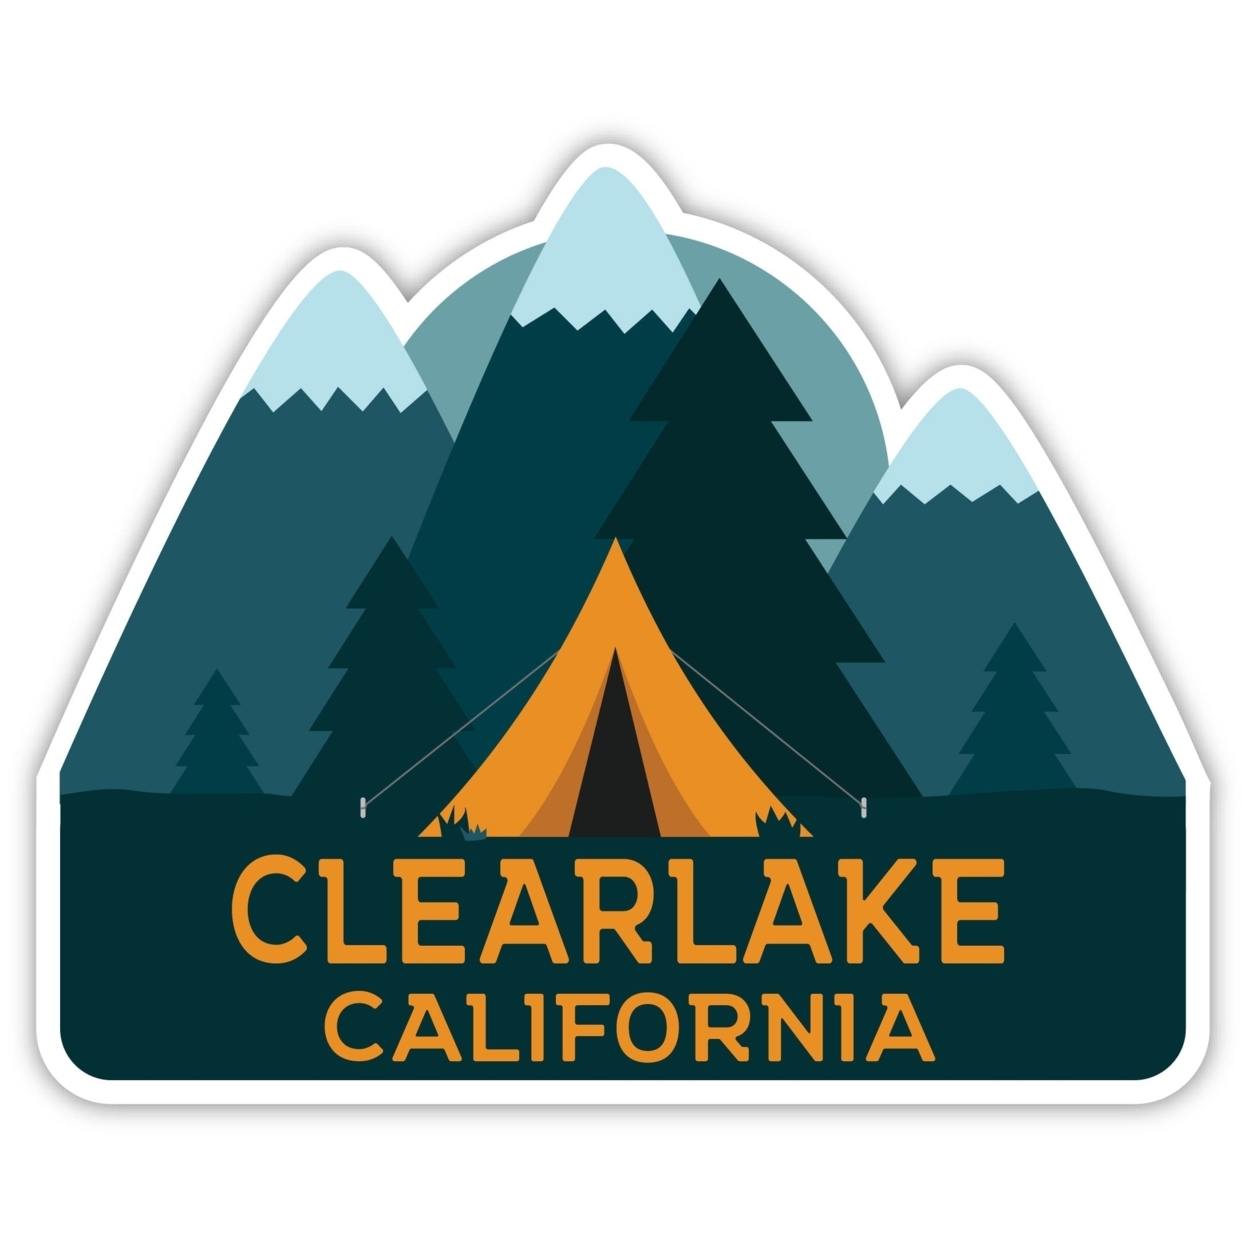 Clearlake California Souvenir Decorative Stickers (Choose Theme And Size) - 4-Pack, 8-Inch, Tent